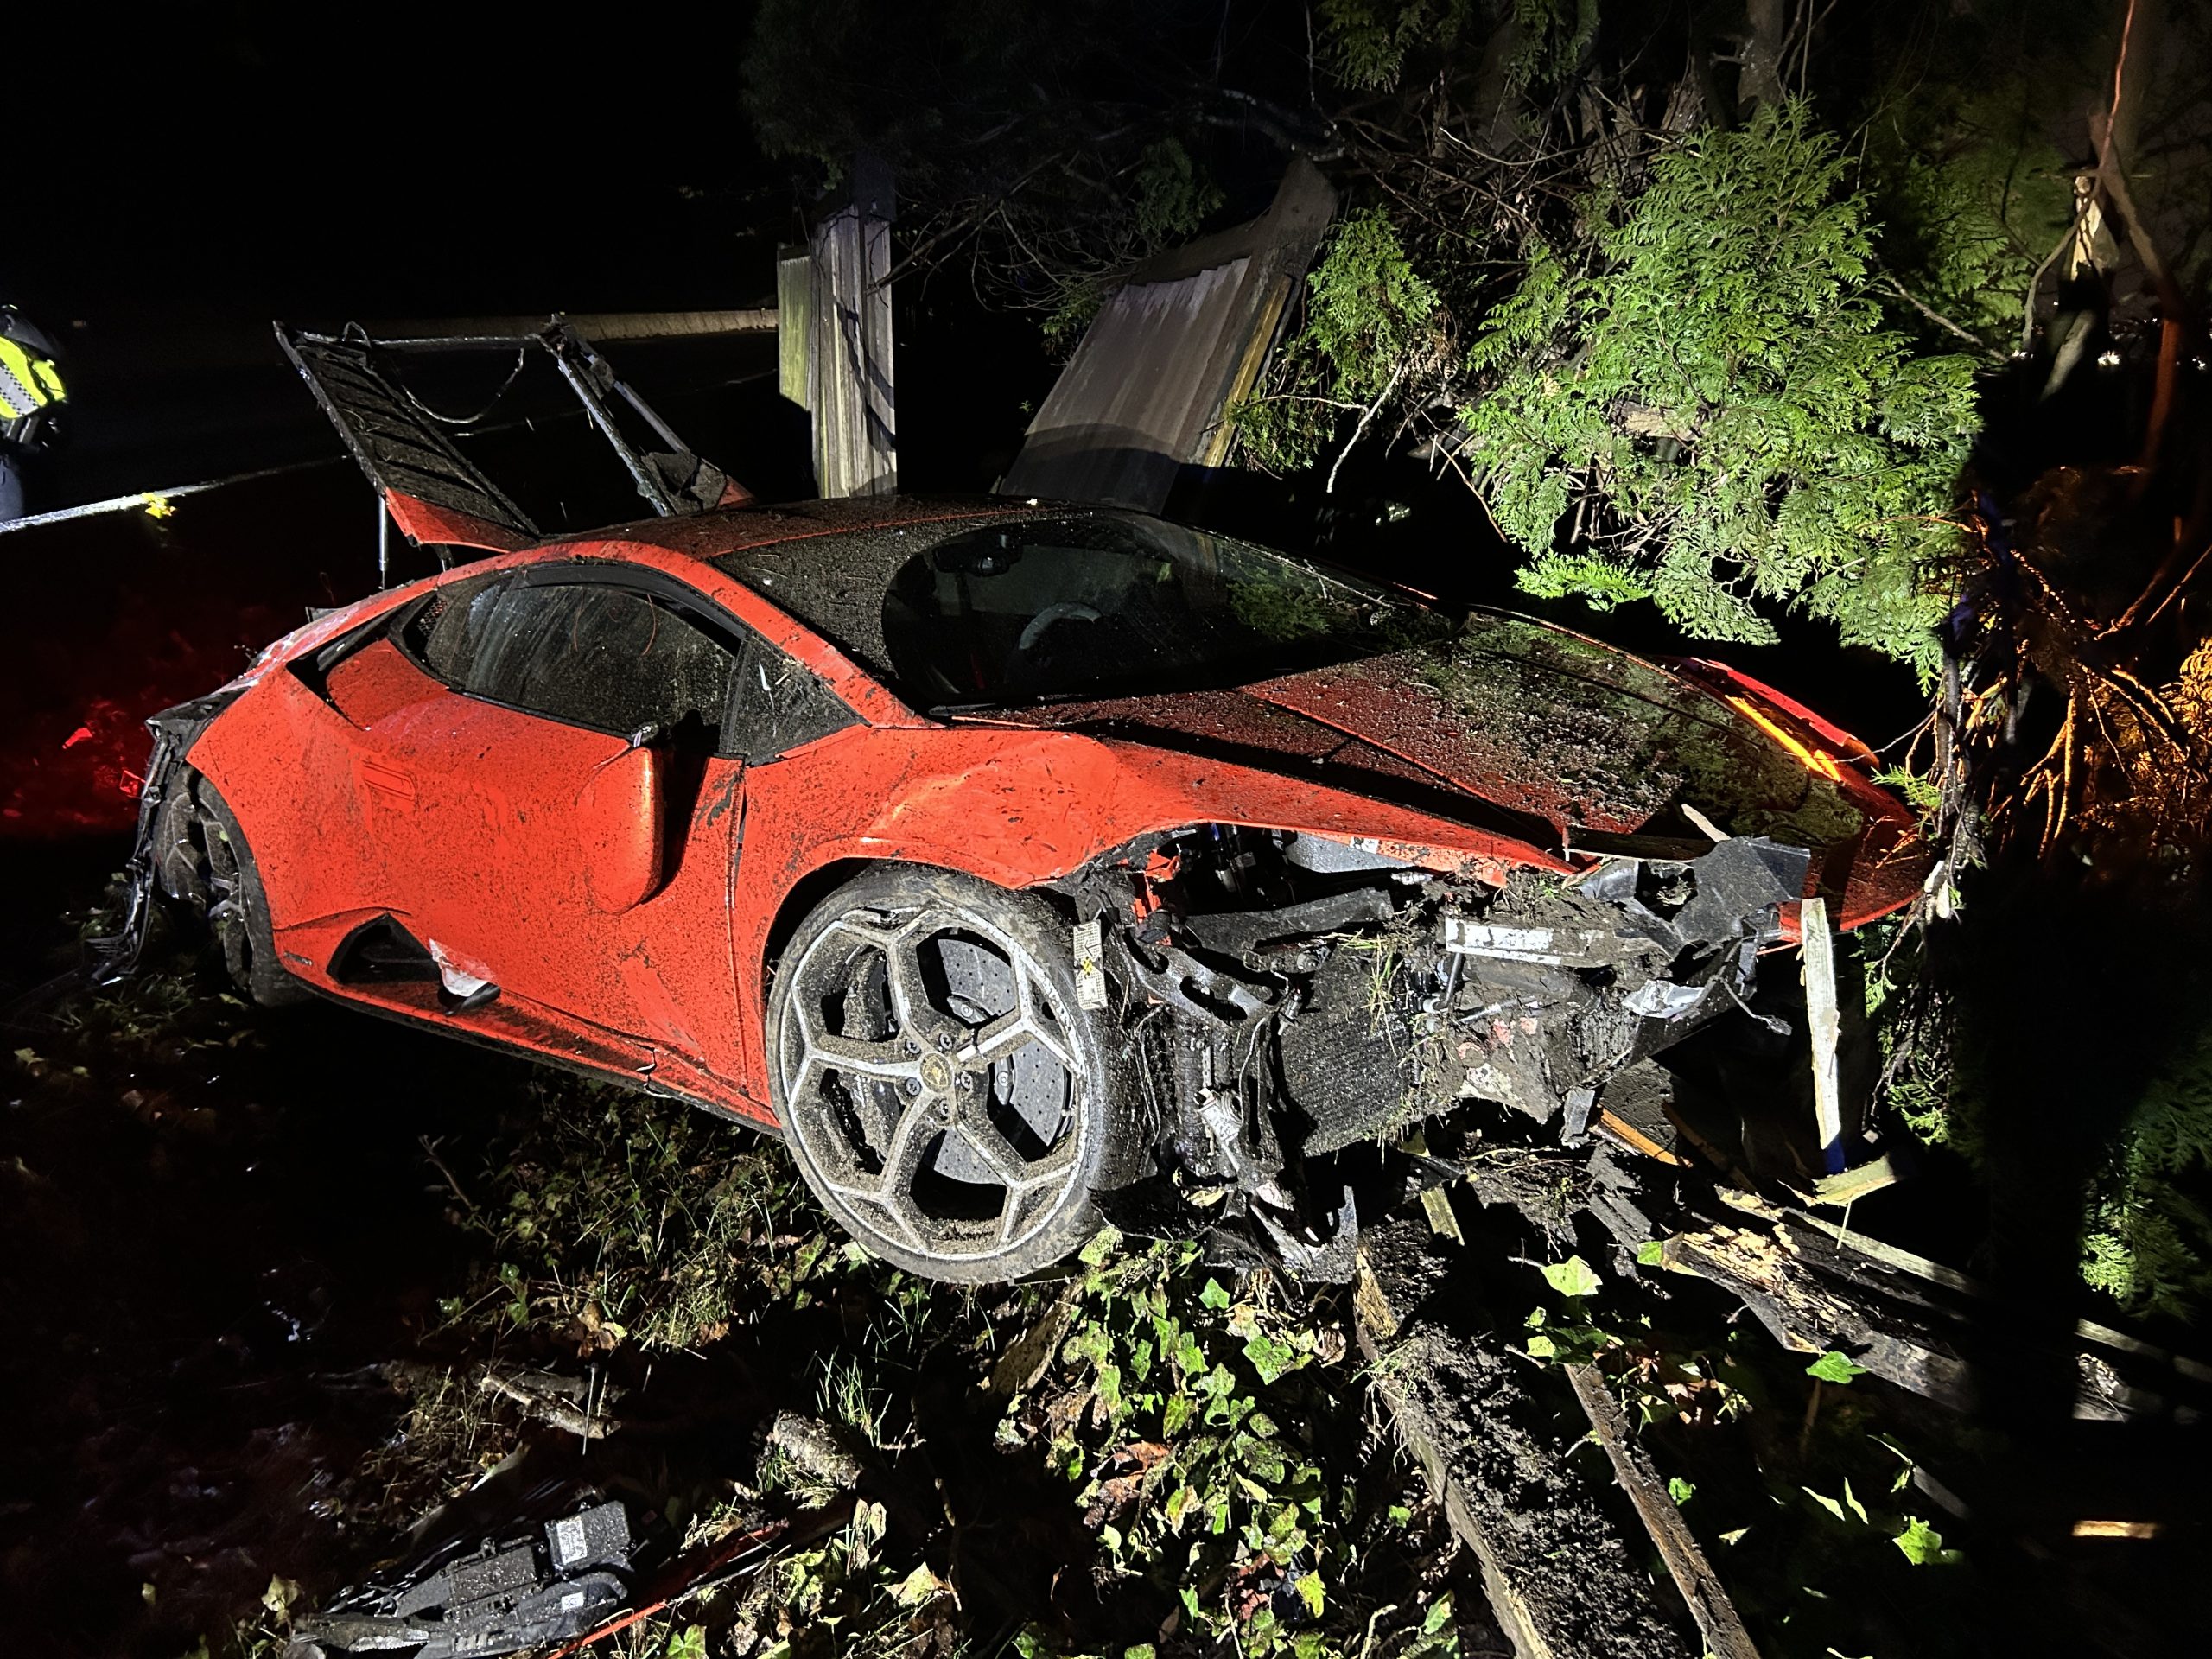 The 13-year-old boy left the Lamborghini smashed to pieces in a ditch after crashing it in Canada